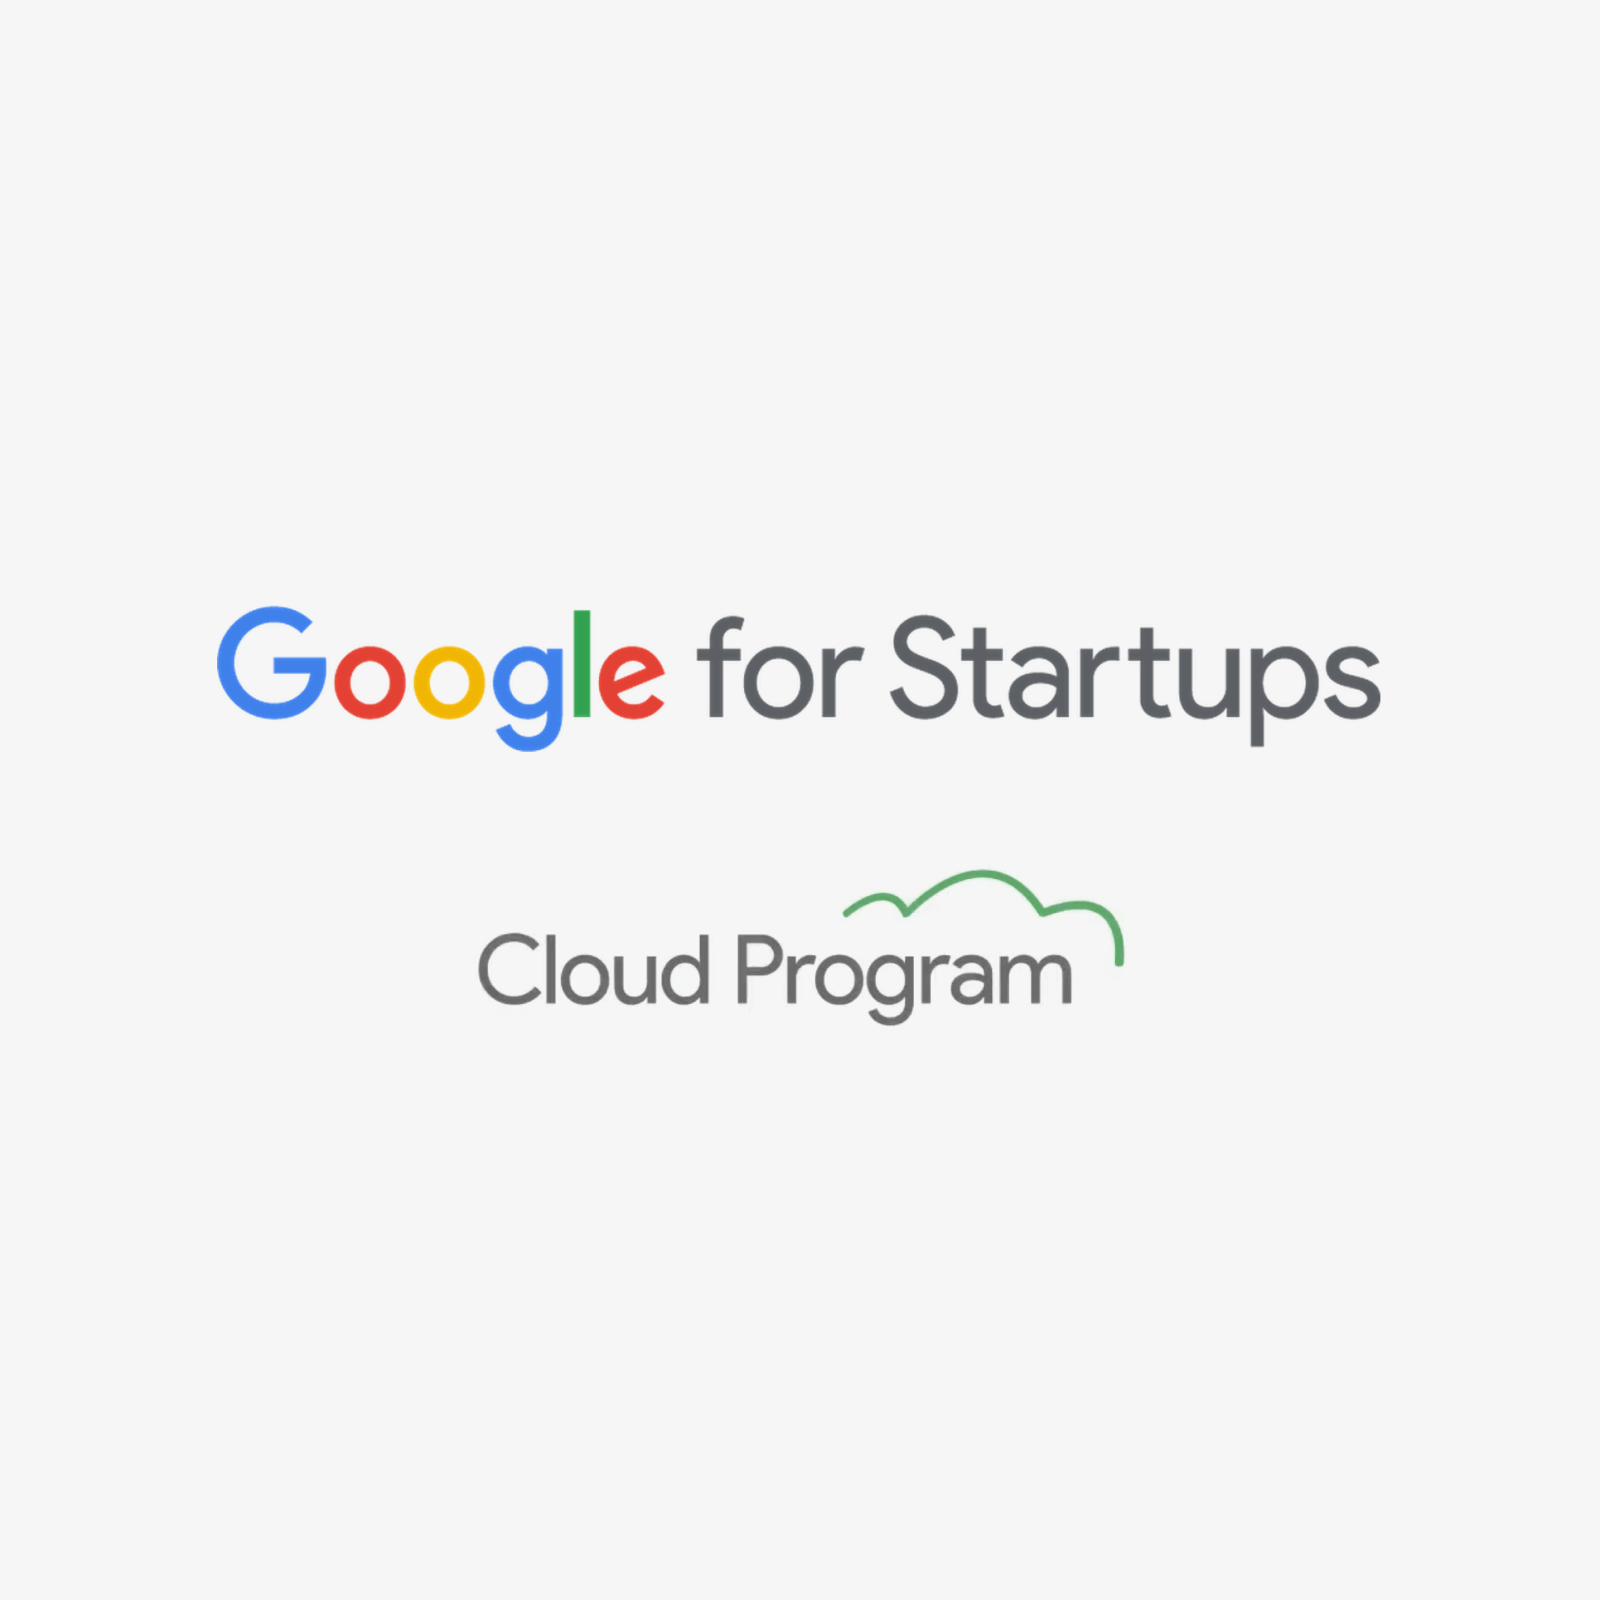 Timerise is now part of the Google for Startups Cloud Program